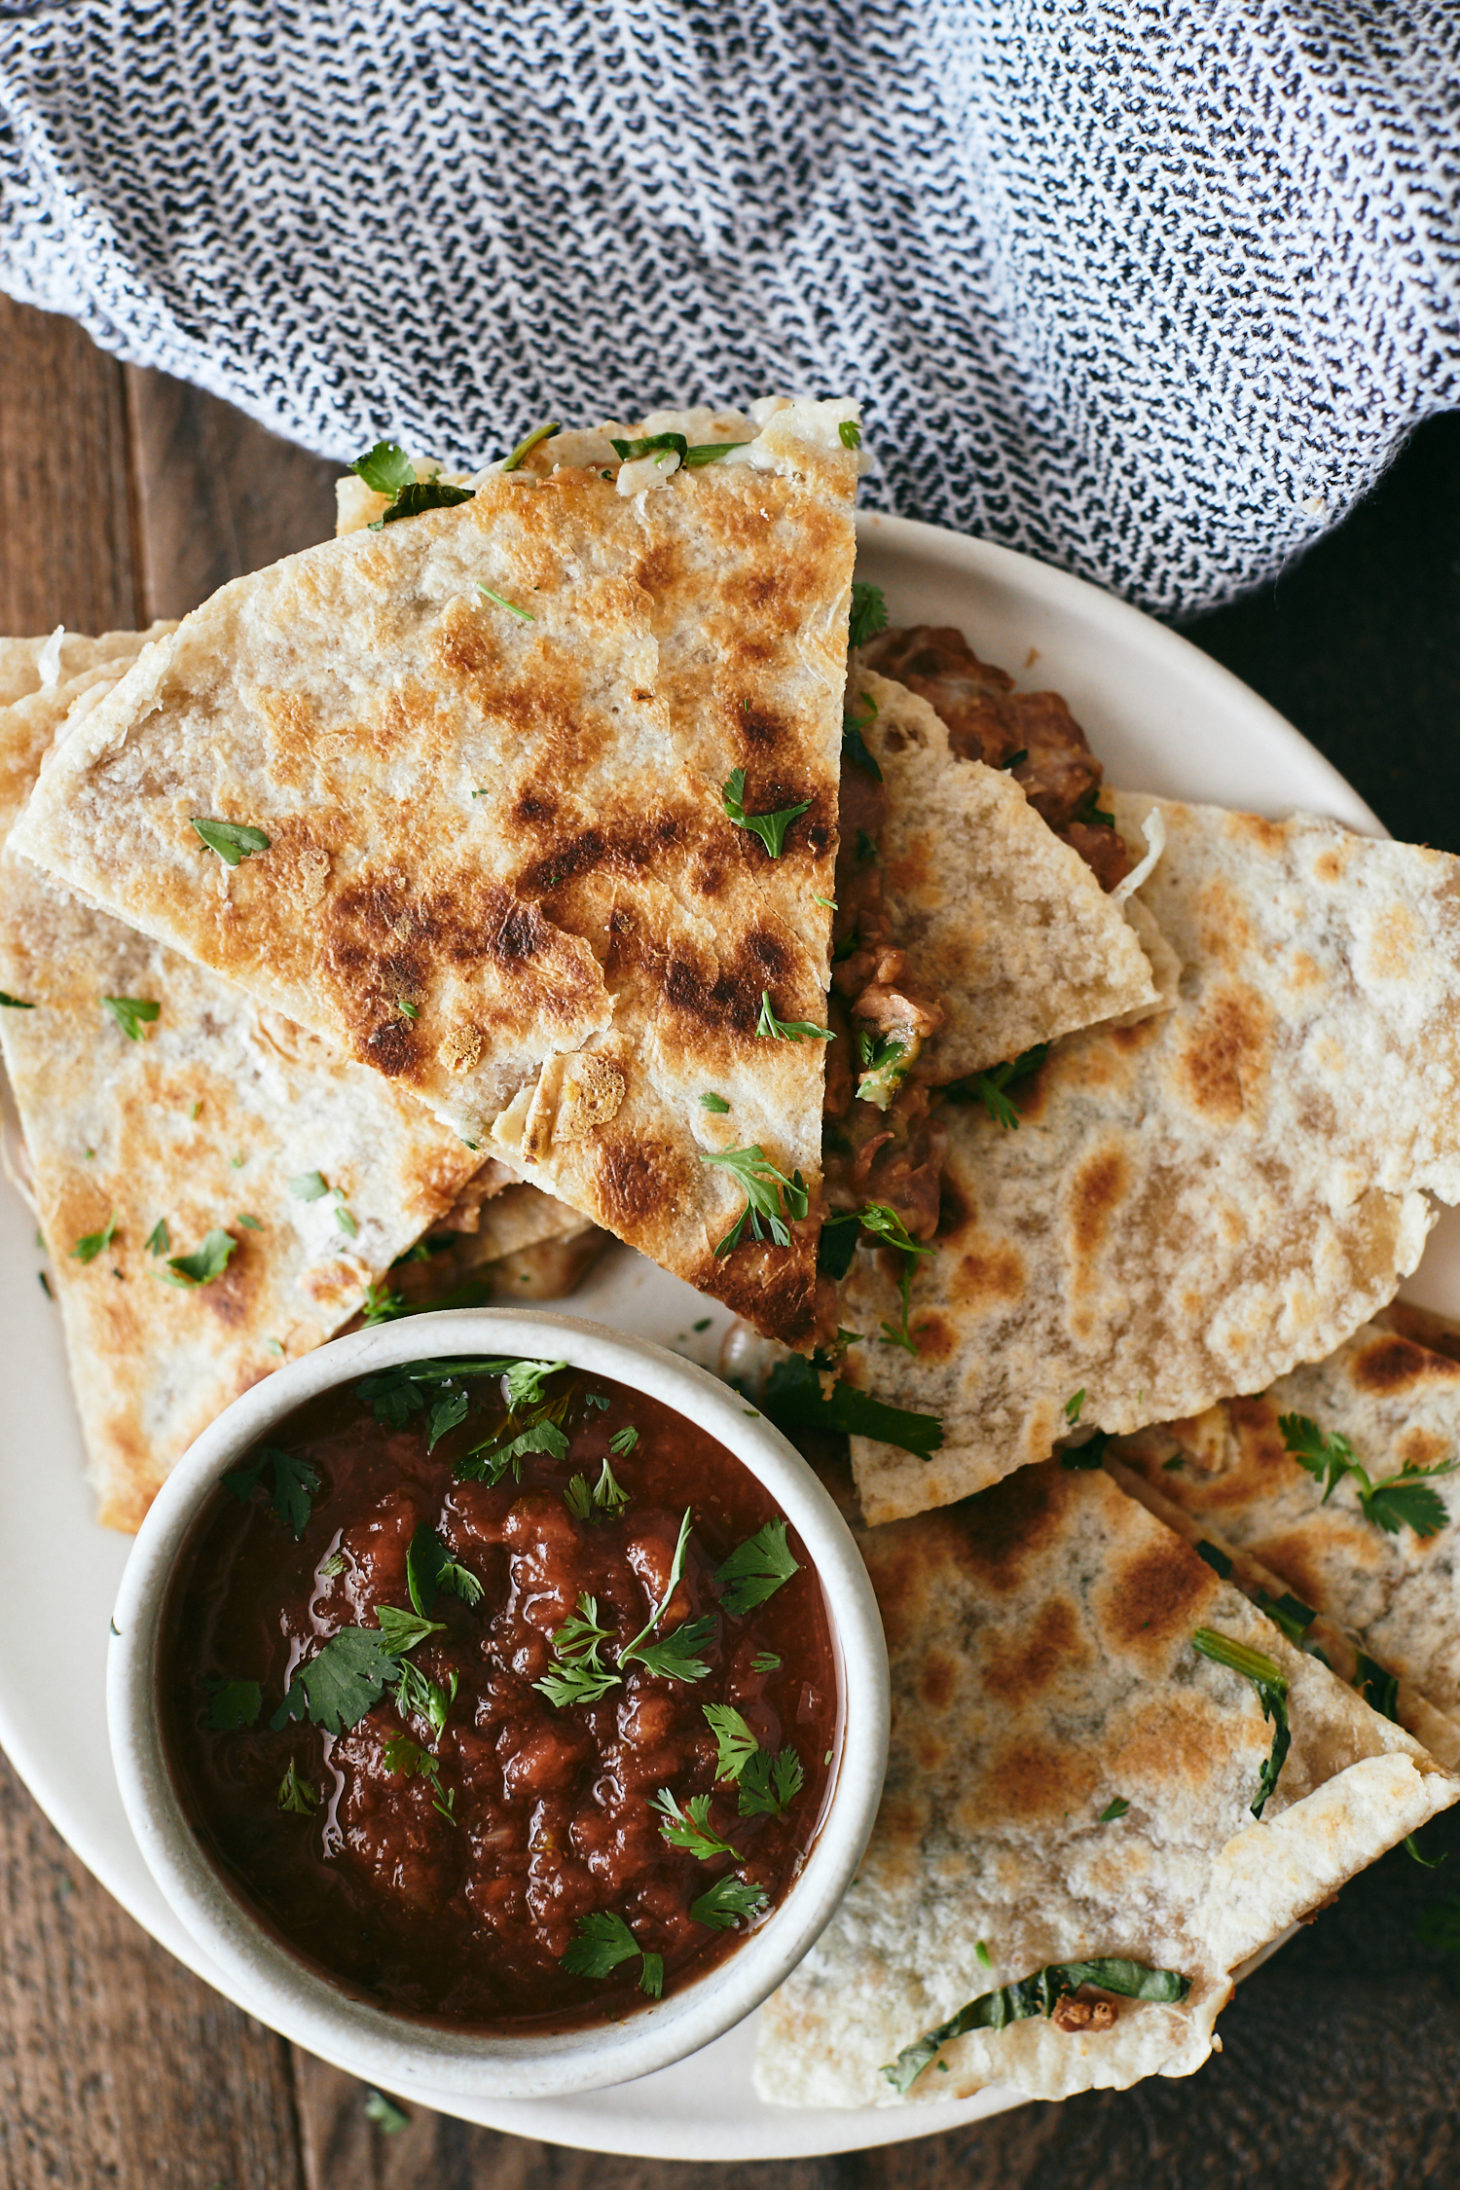 Overhead photograph of quesadillas on a white plate with a small white bowl of red salsa.